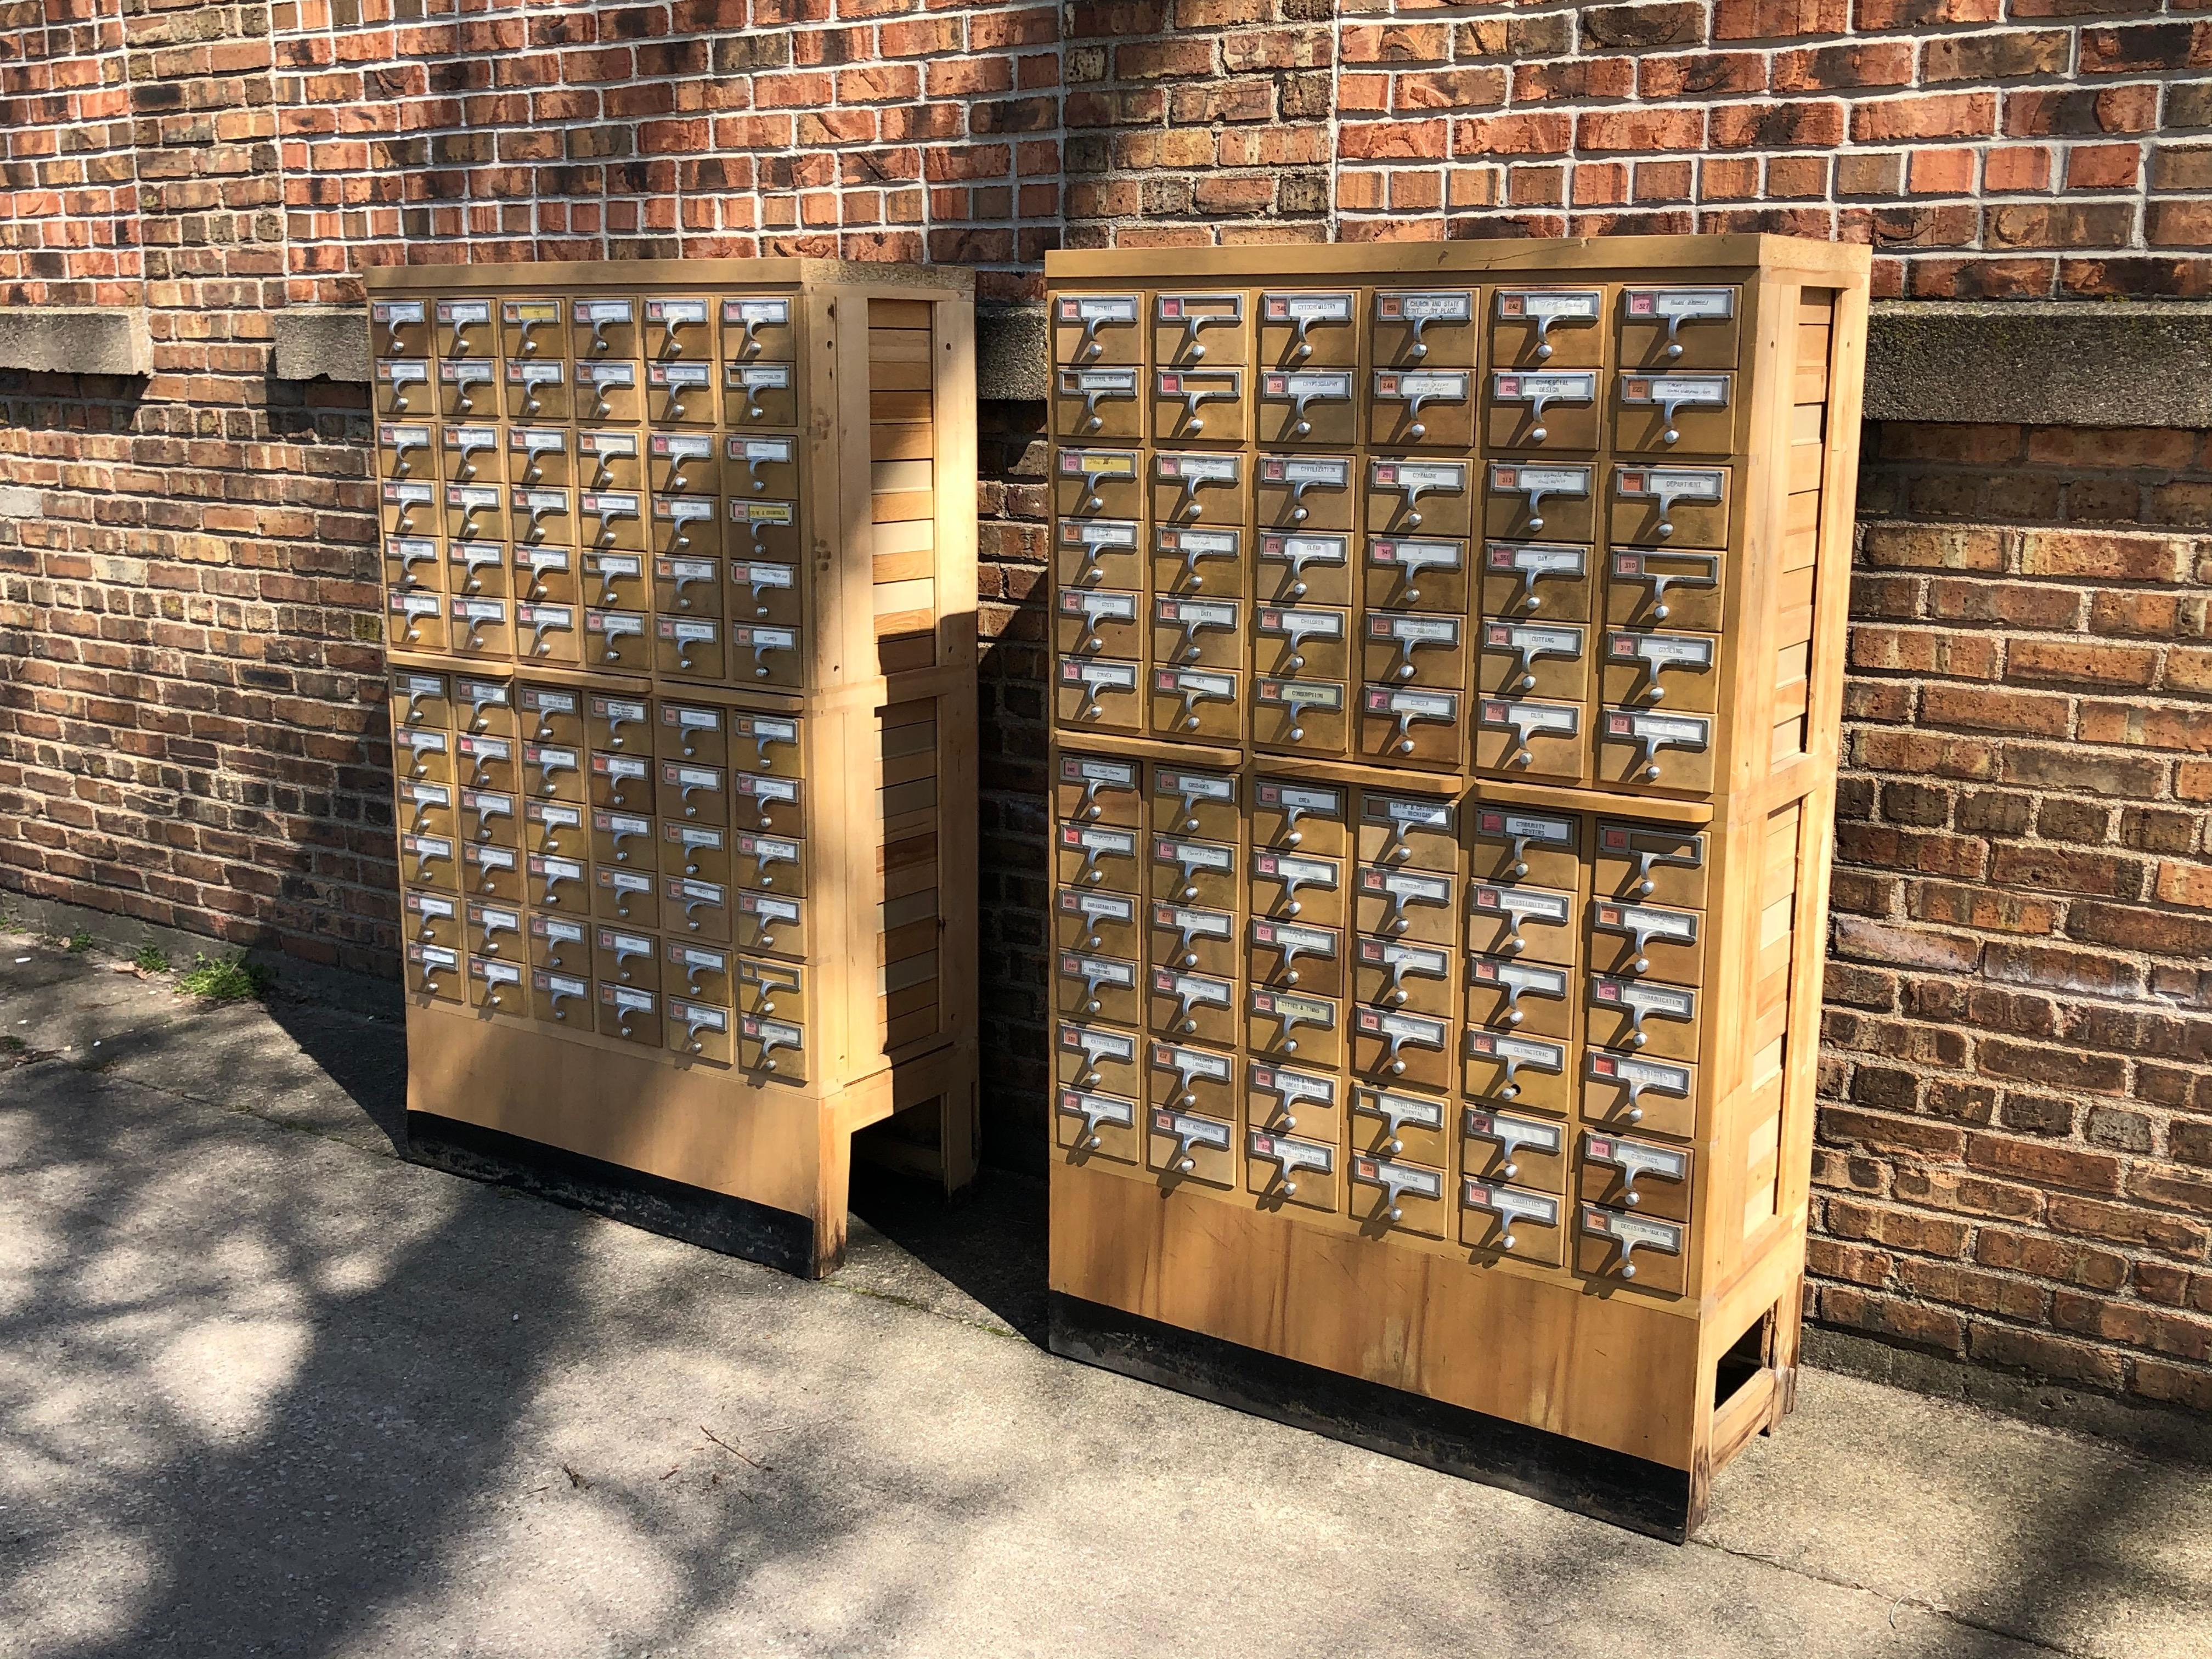 A rare pair of midcentury library card catalog cabinets procured from the library at Western Michigan University. The card catalogs feature beautiful wood grain and an amazing 72 dovetailed drawers. All of the drawers slide well, and they have